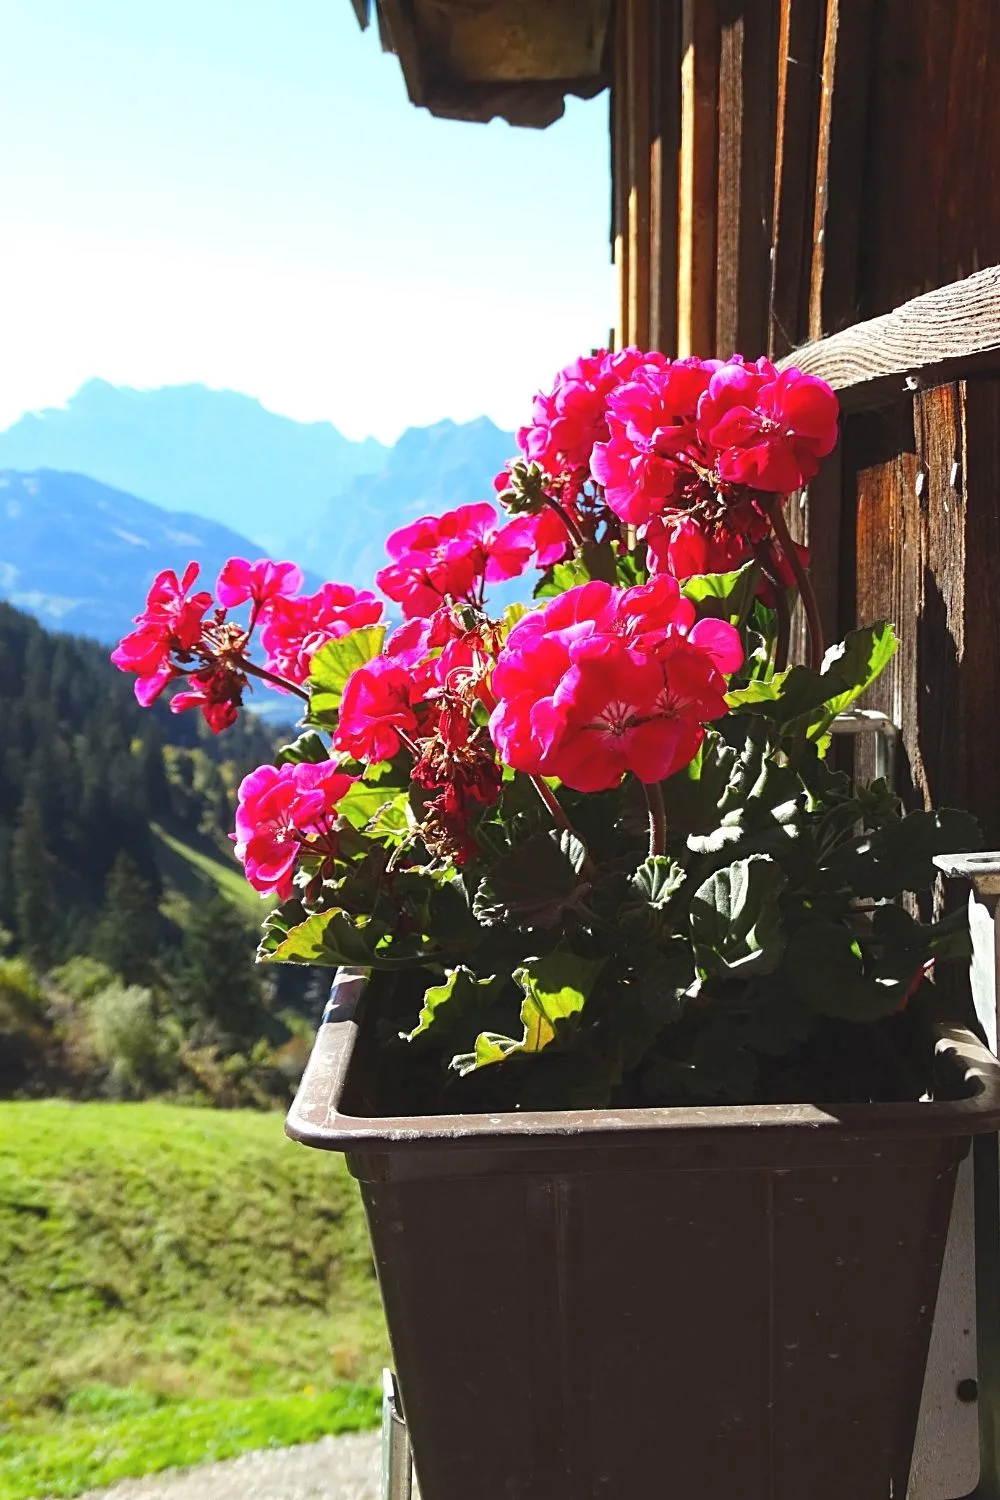 Geranium is a colorful plant you can grow by your southeast-facing window